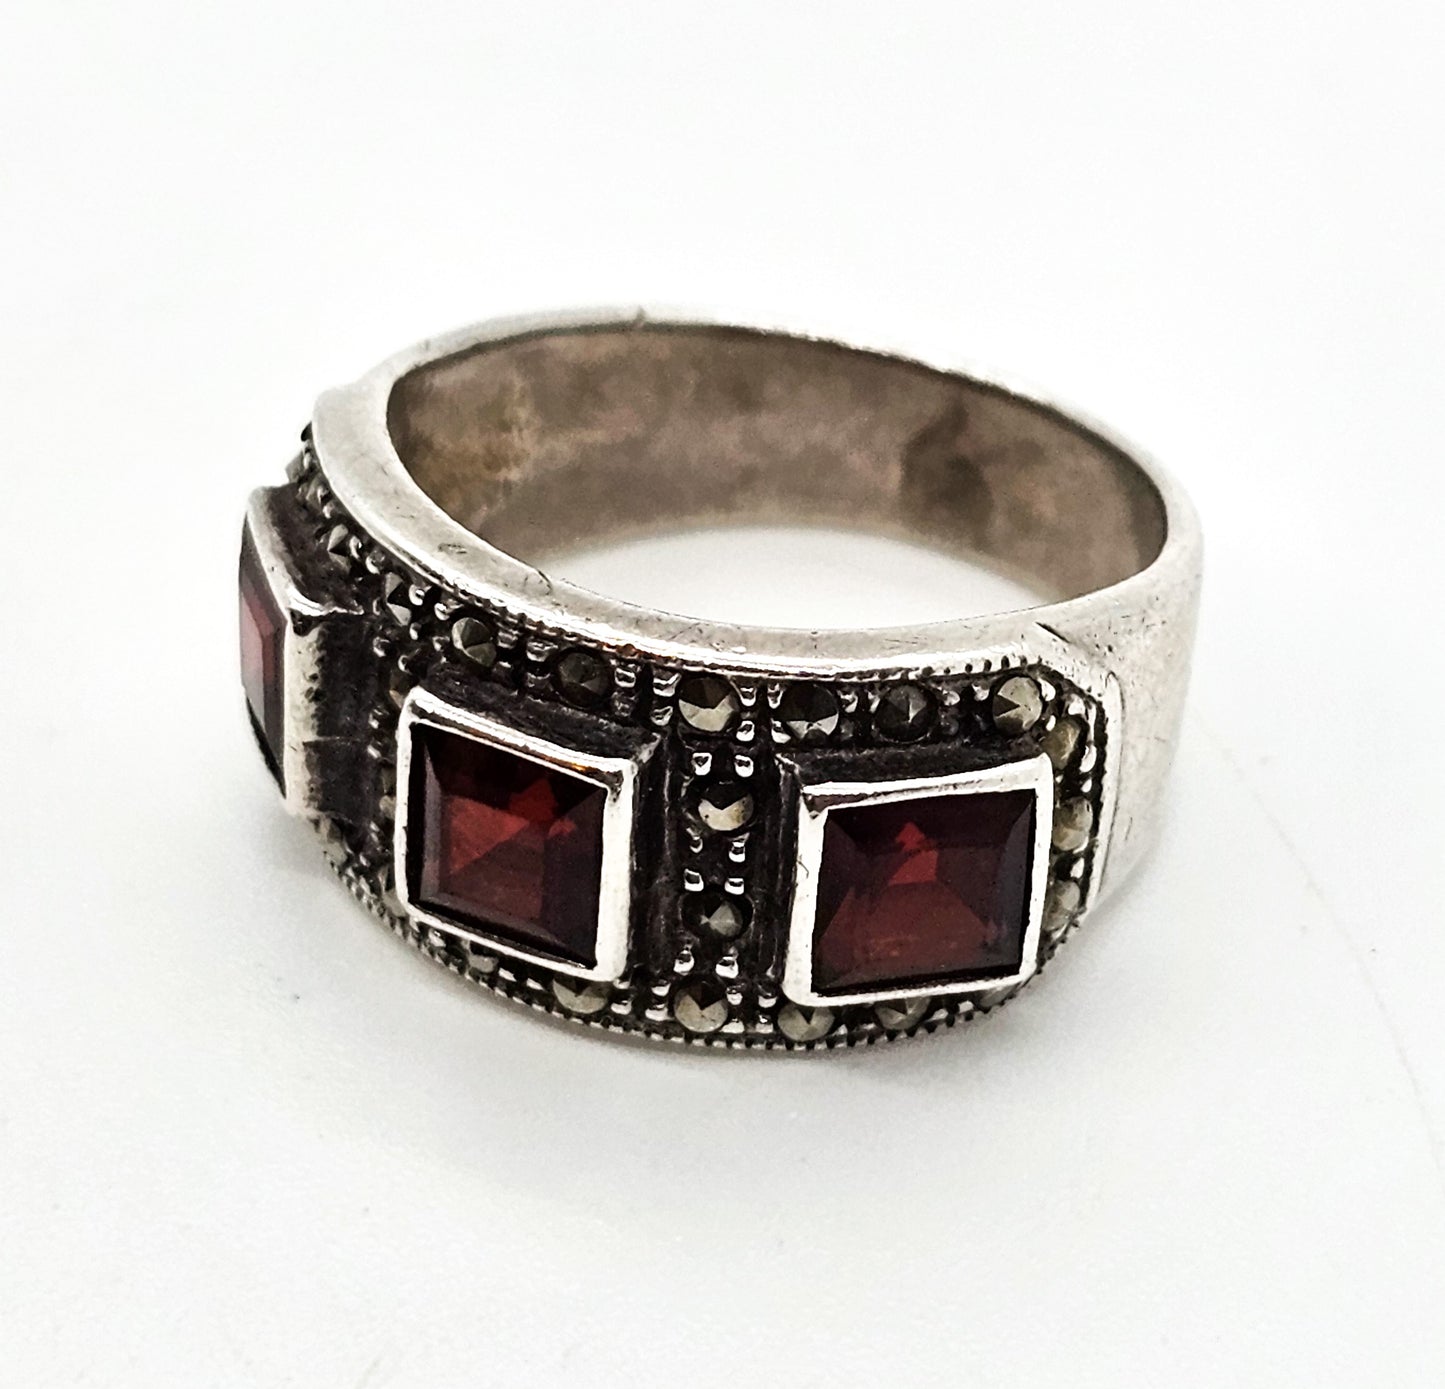 Garnet and marcasite Three stone vintage sterling silver cigar band ring size 8